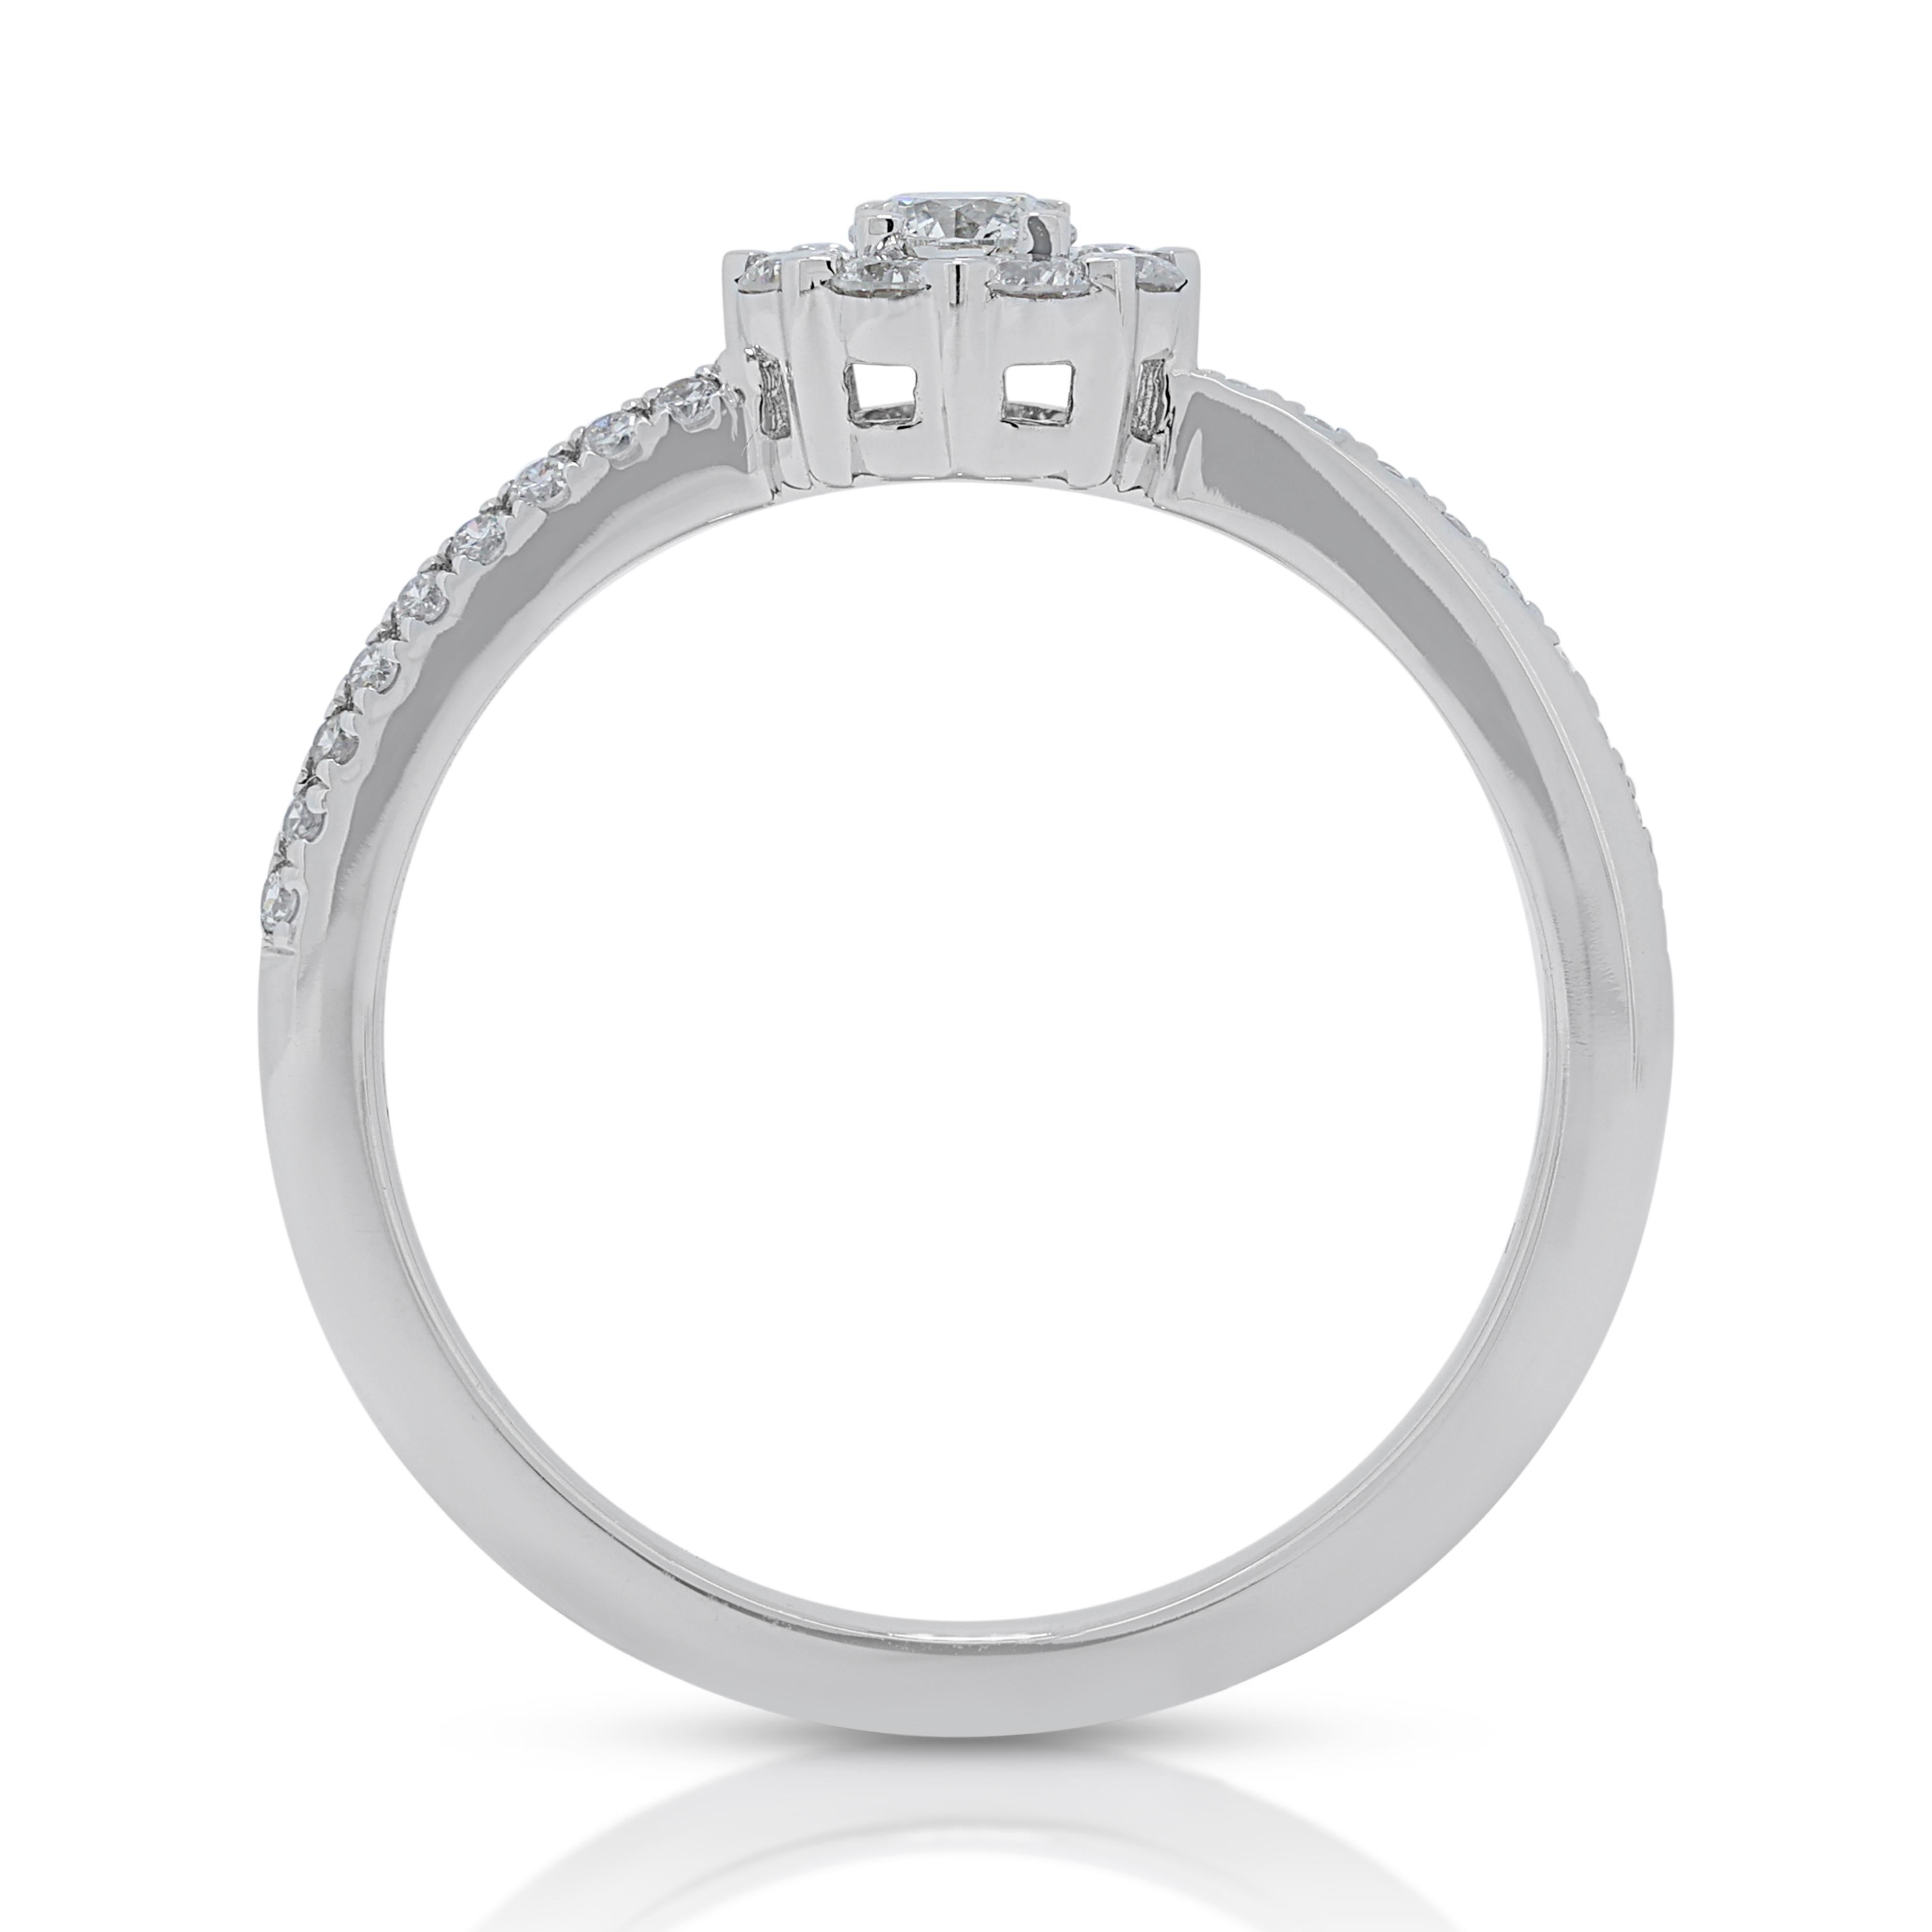 Women's Classic 0.45ct Diamond Pave Ring in 18K White Gold For Sale